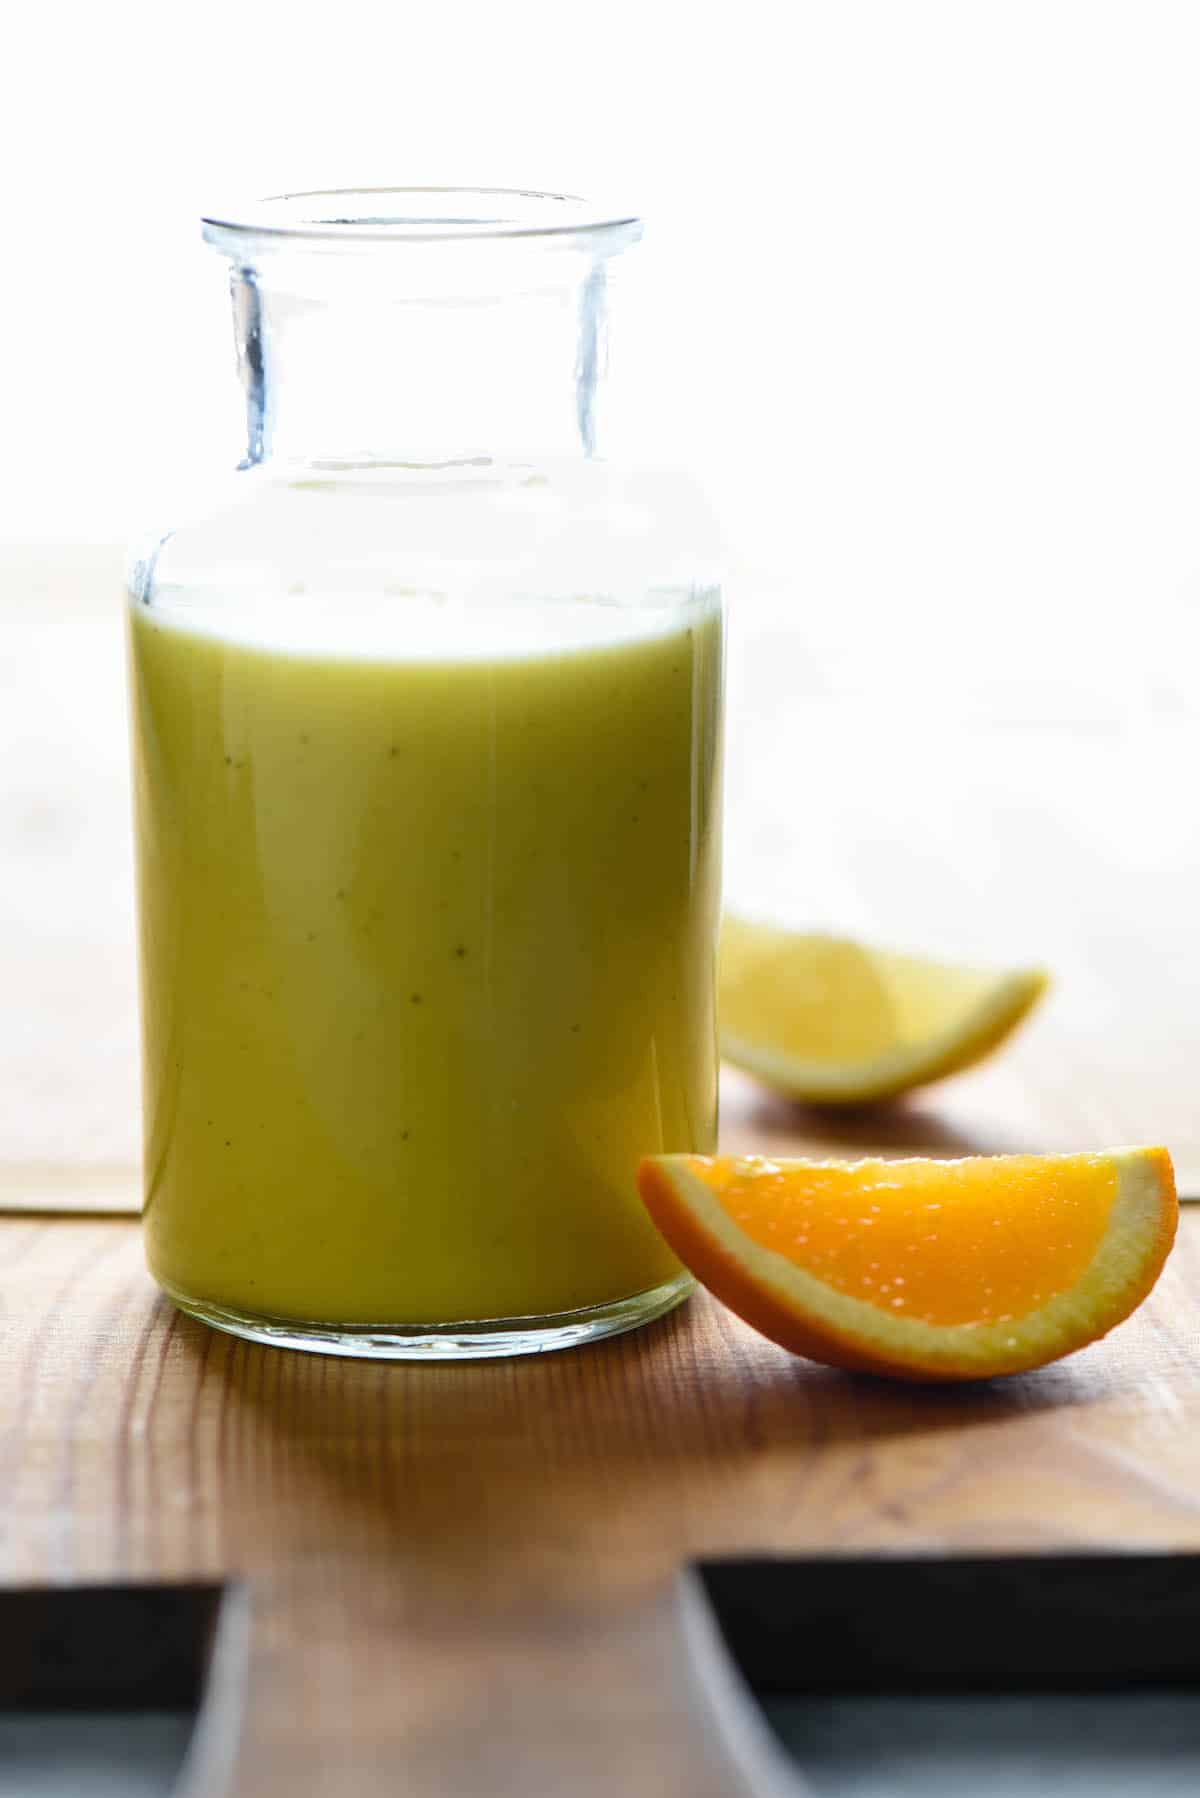 Small glass bottleneck jar filled with a yellow-hued healthy salad dressing. Slices of orange and lemon on cutting board near dressing.